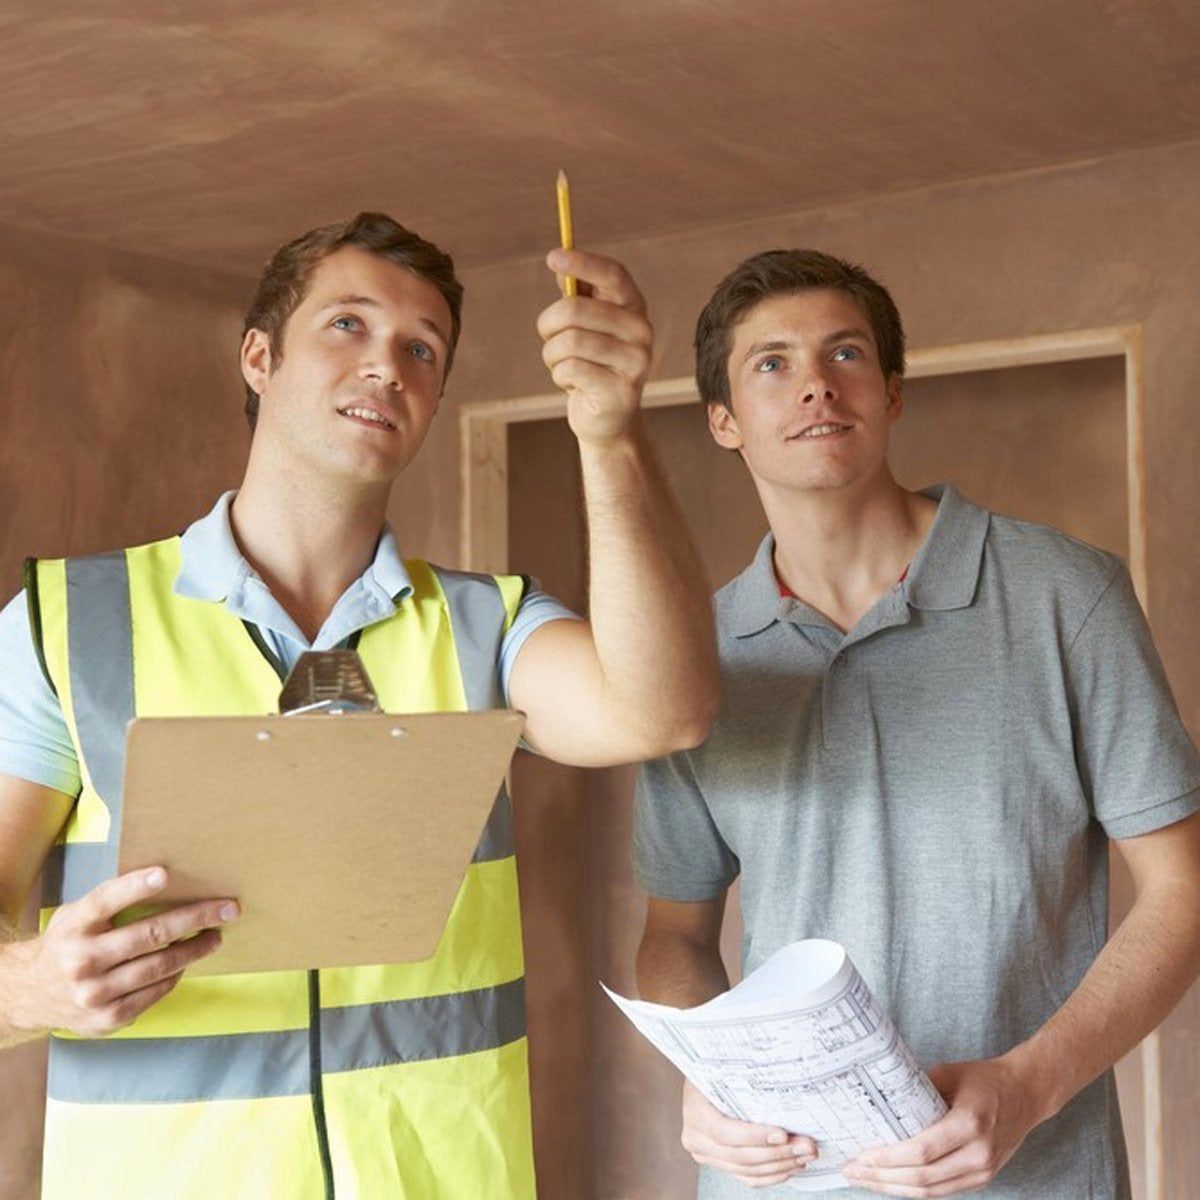 12 Tips for Getting the Most out of a Home Inspections